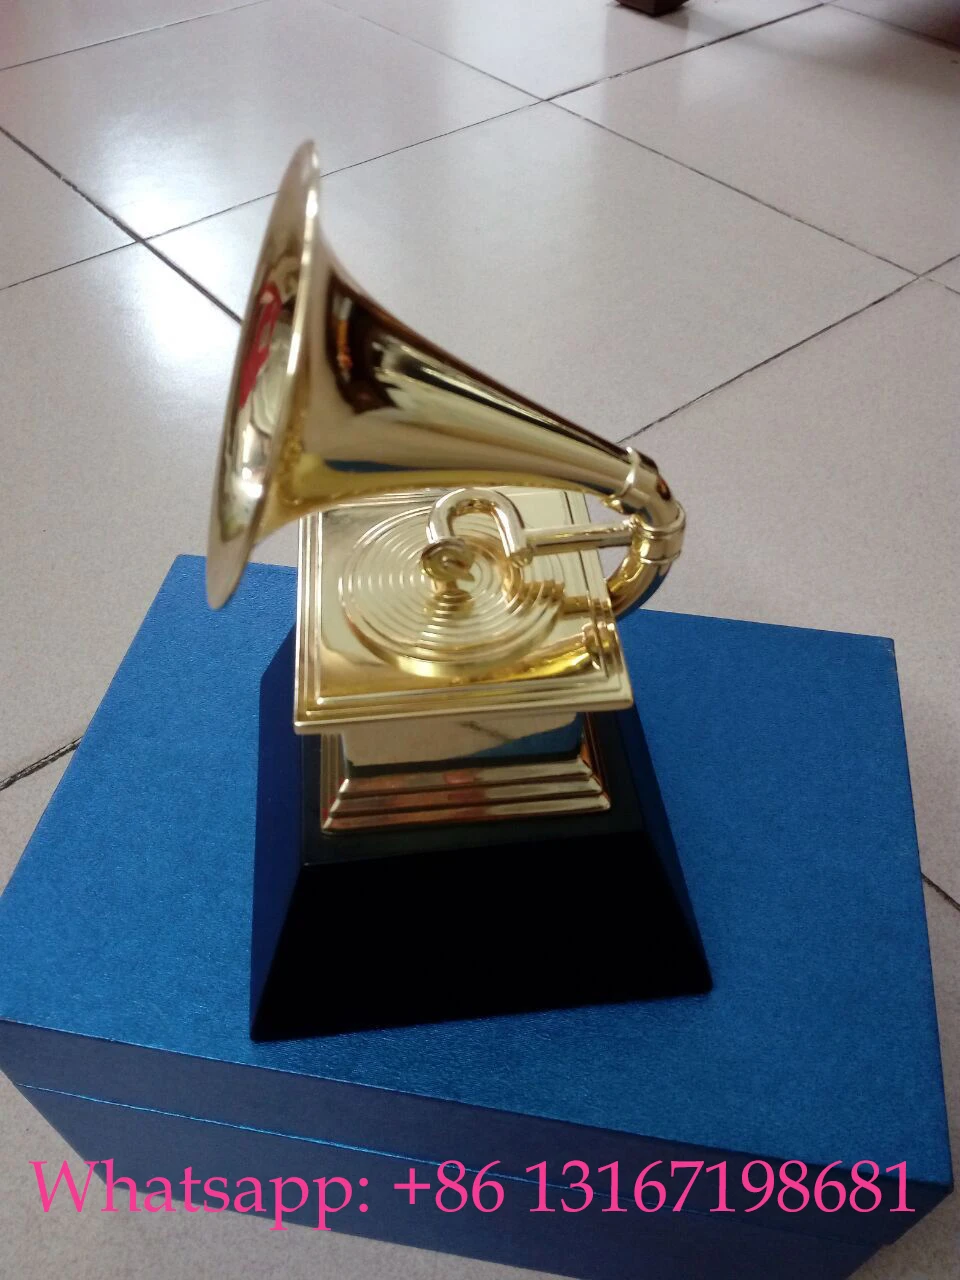 2018 THE 60 TH GRAMMYS Awards Gramophone Metal Trophy by NARAS 18.5cm Height Nice Gift Souvenir Collection And Free Shipping